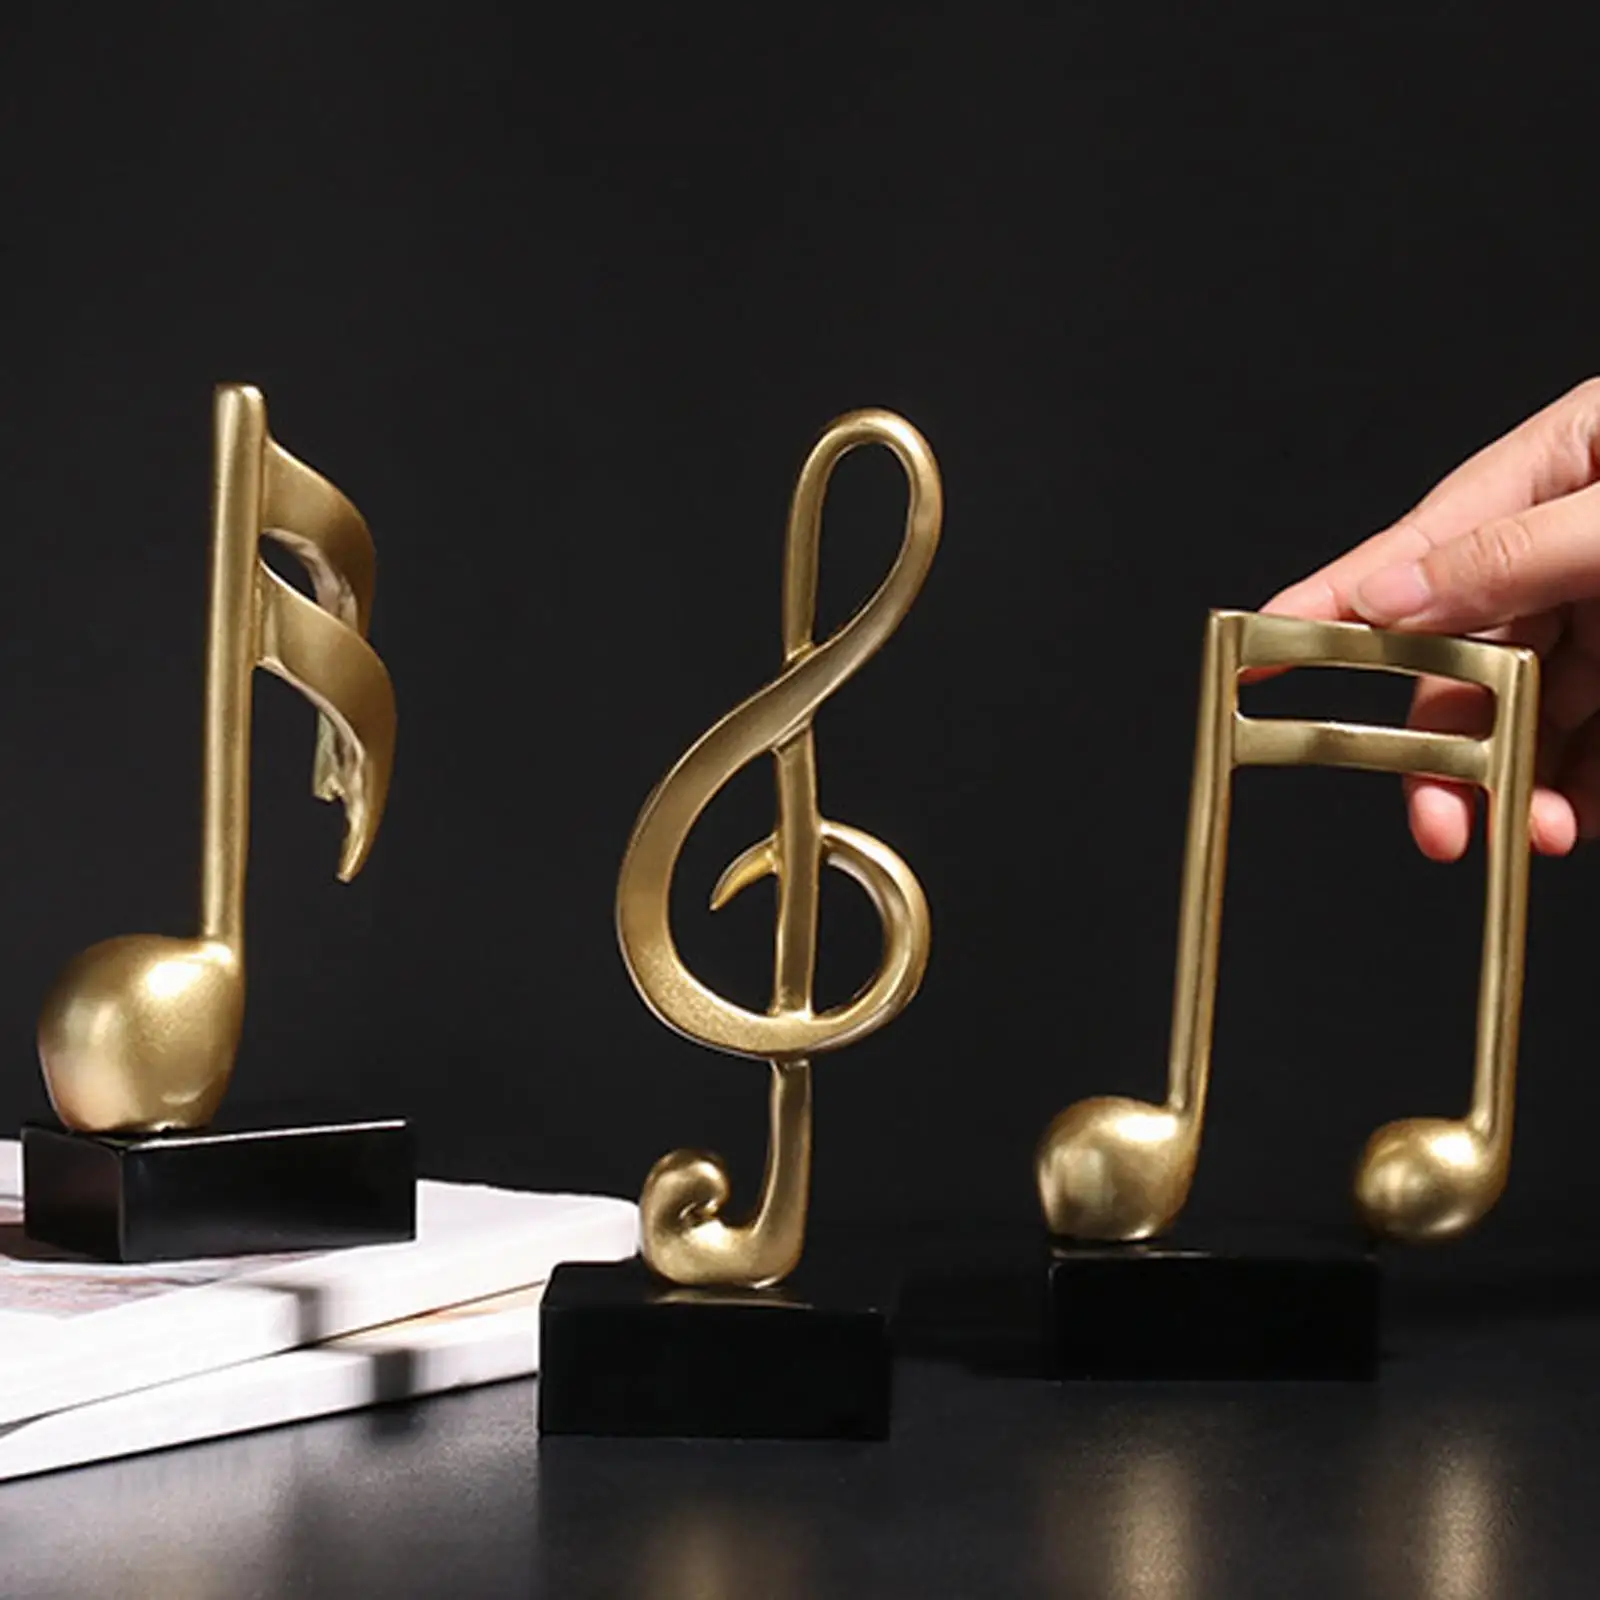 Creative Music Note Statue Musical Notation Ornament for Home Bookcase Decor